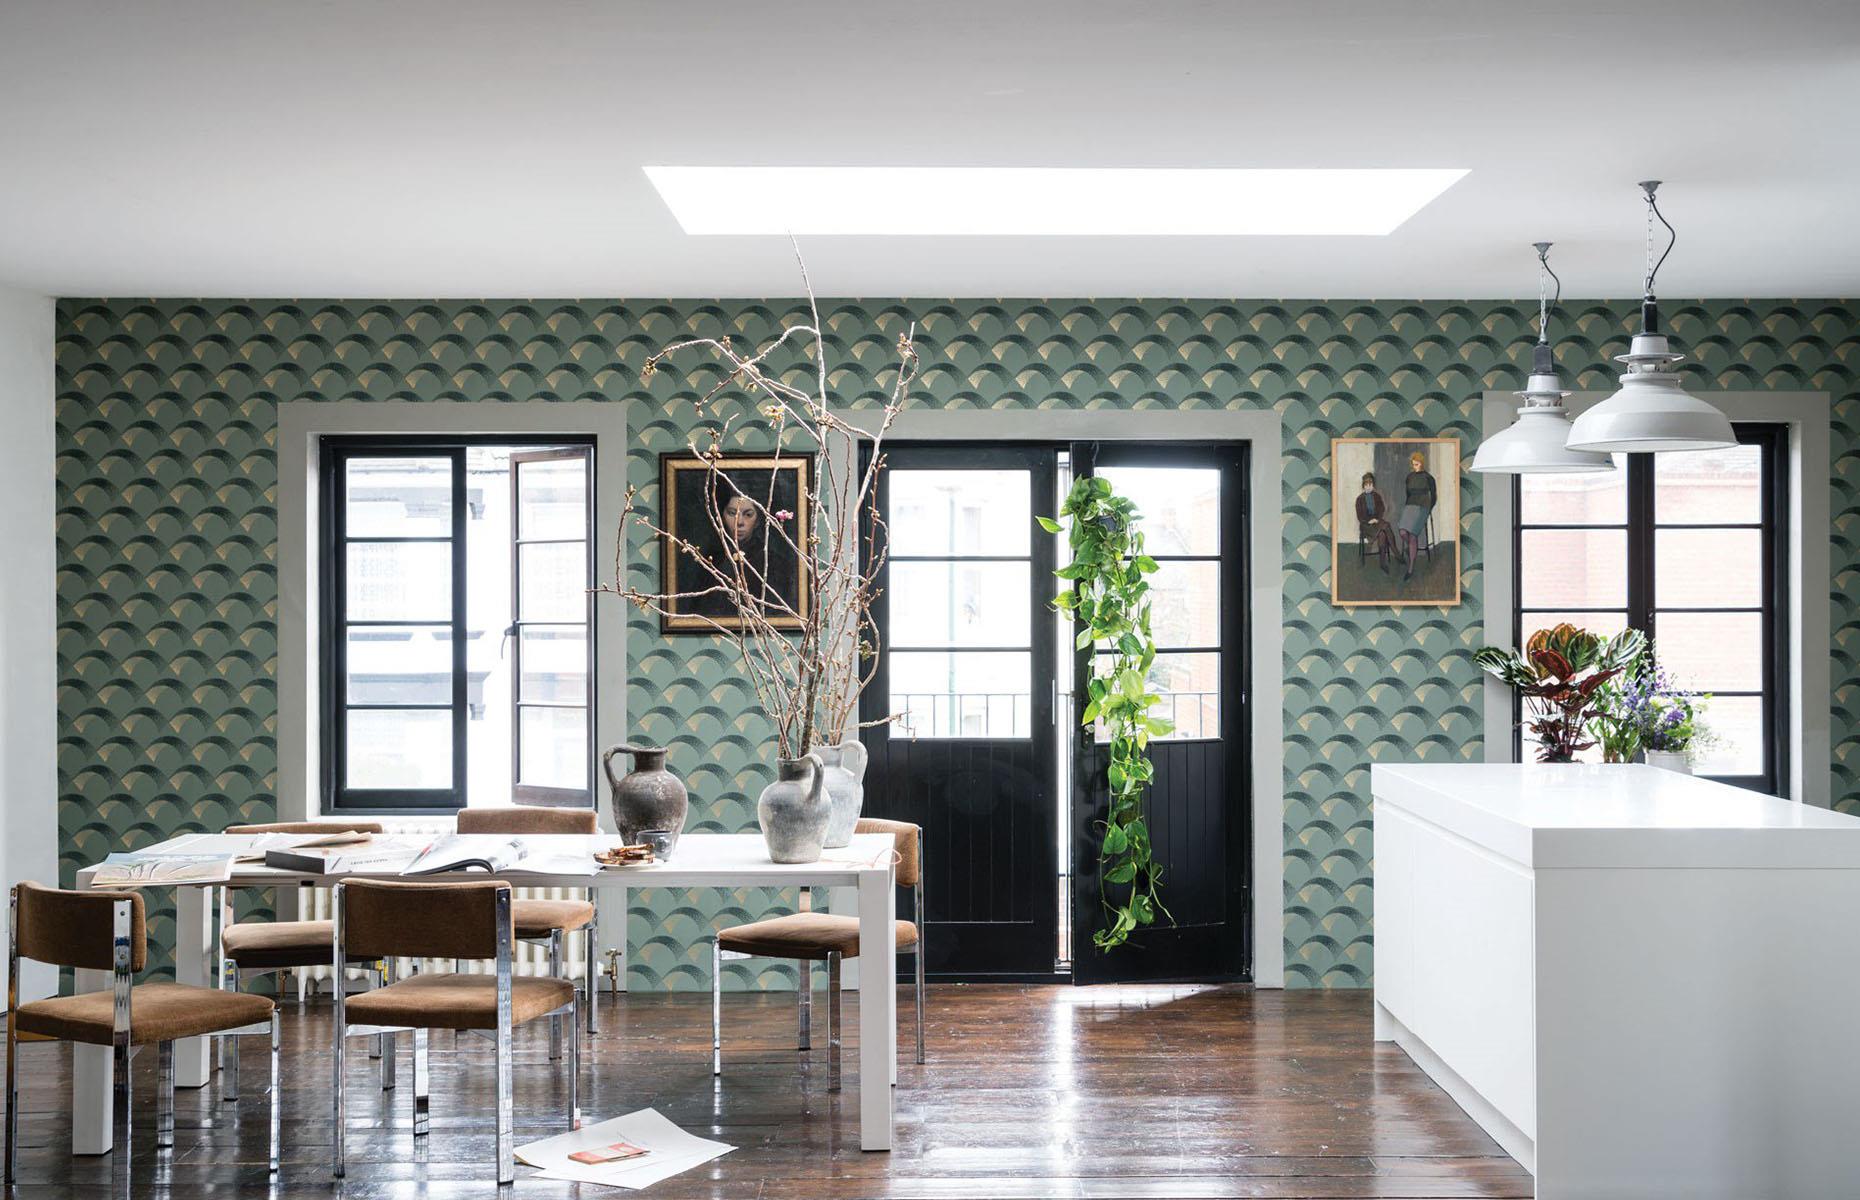 <p>If your multiuse space feels unharmonious and disjointed, a bold design choice can be the unifying element you need. This Art Deco-inspired Farrow & Ball wallpaper helps tie together the kitchen and dining space with ease, creating a colorful feature wall that balances out the crisp white table and island.</p>